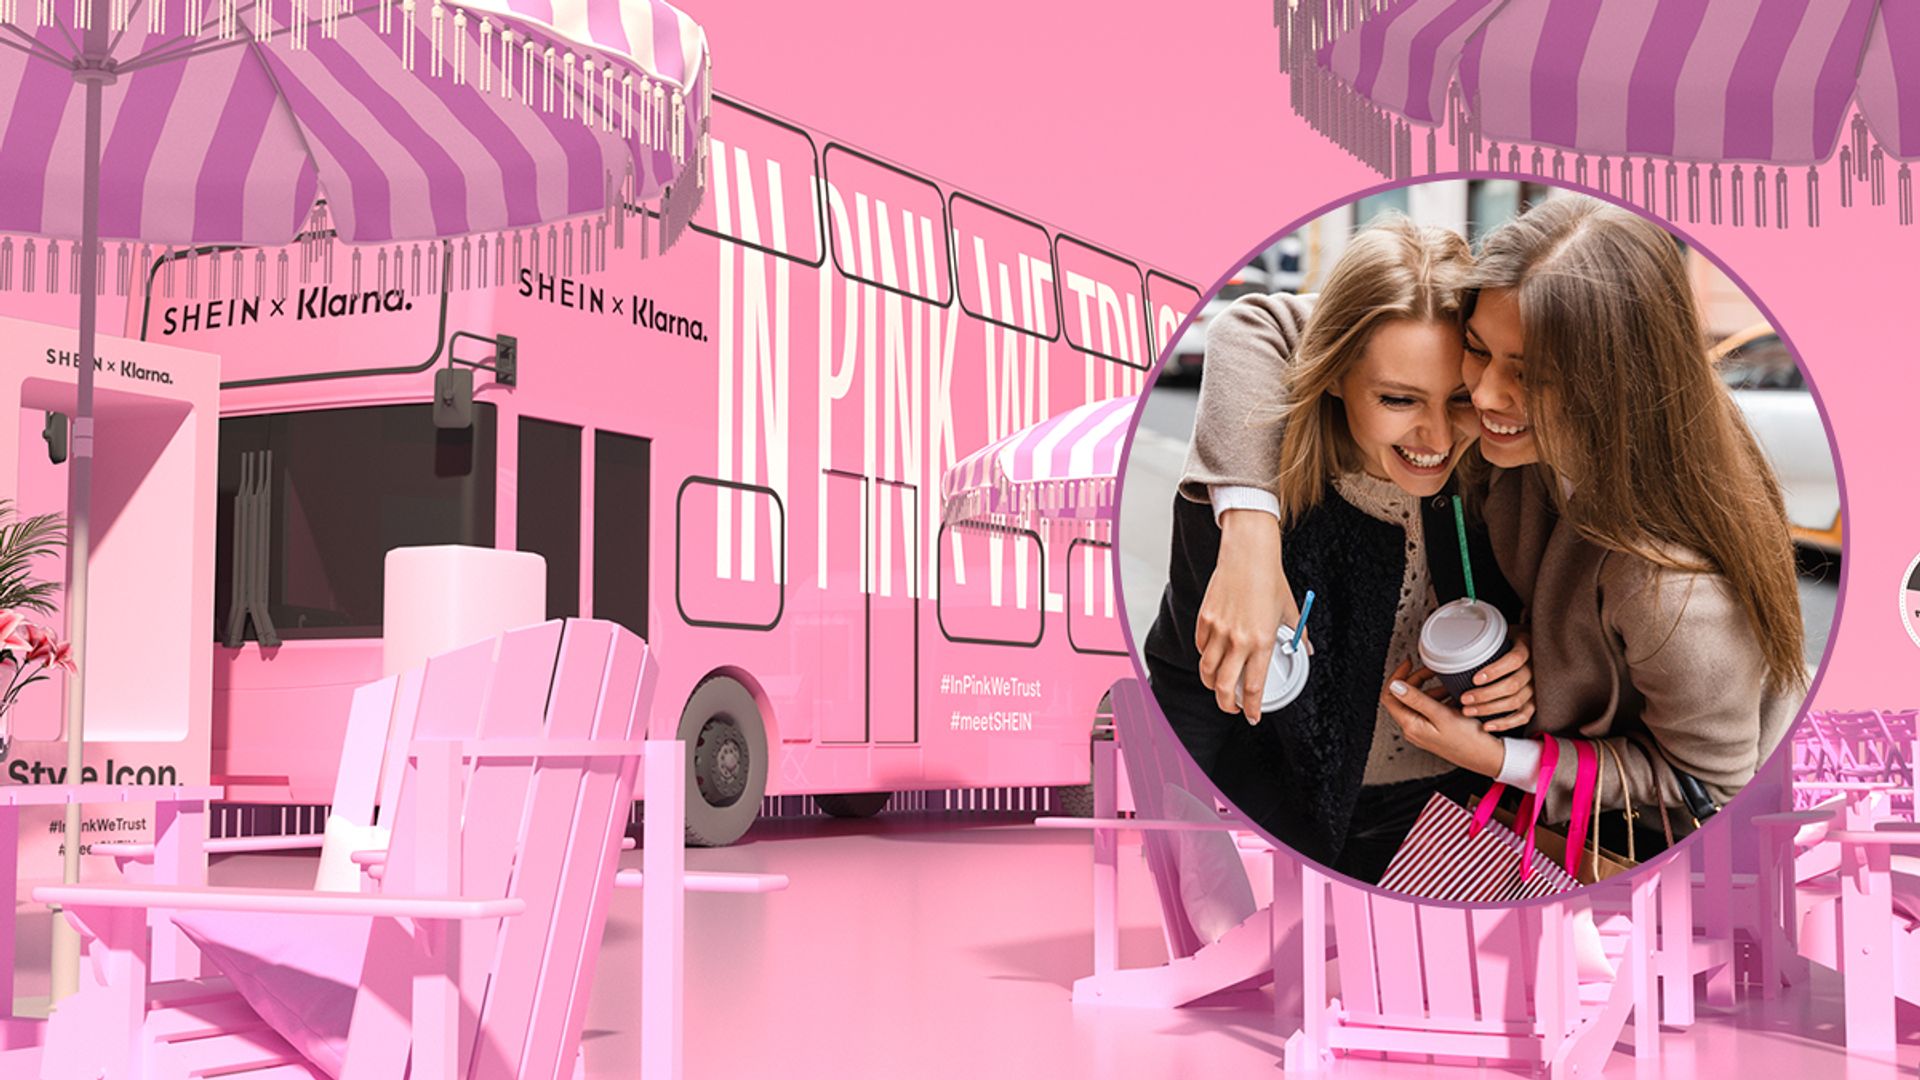 SHEIN is going on tour! How to get free beauty treats, attend talks and win prizes